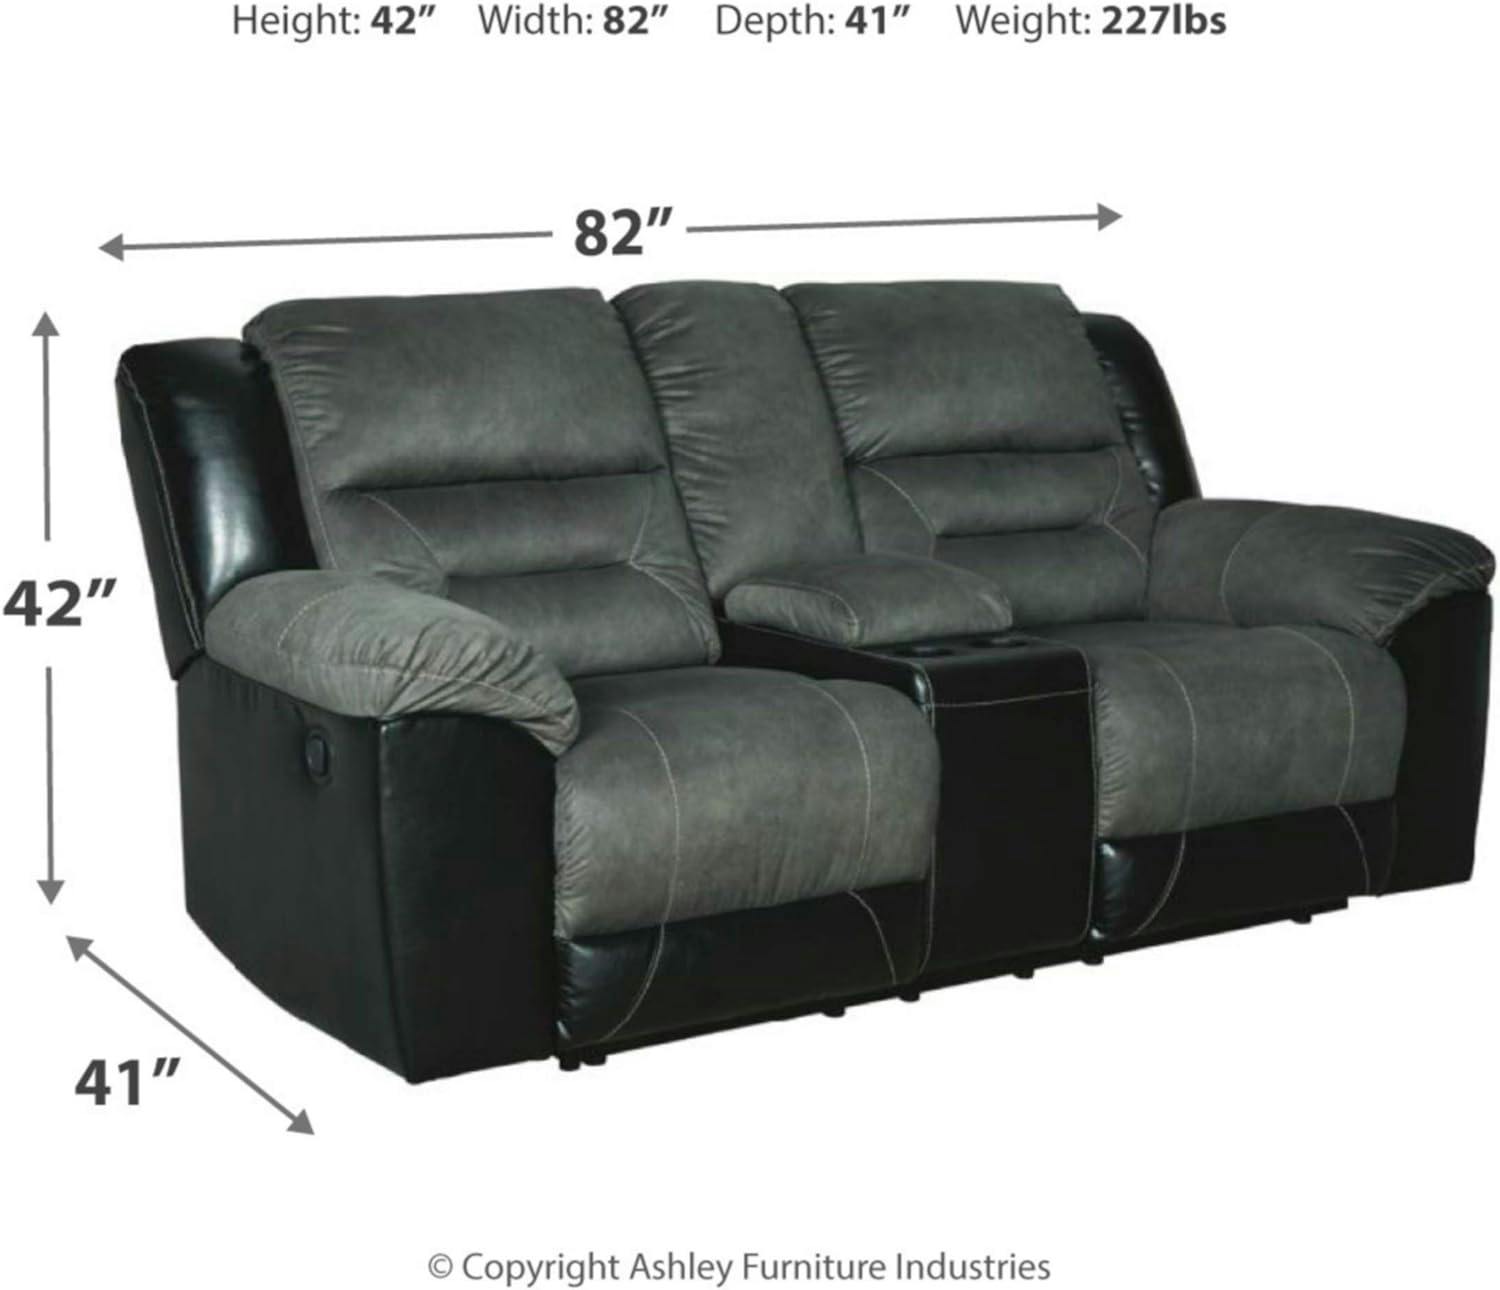 Slate Gray Tufted Reclining Loveseat with Cup Holder in Faux Leather